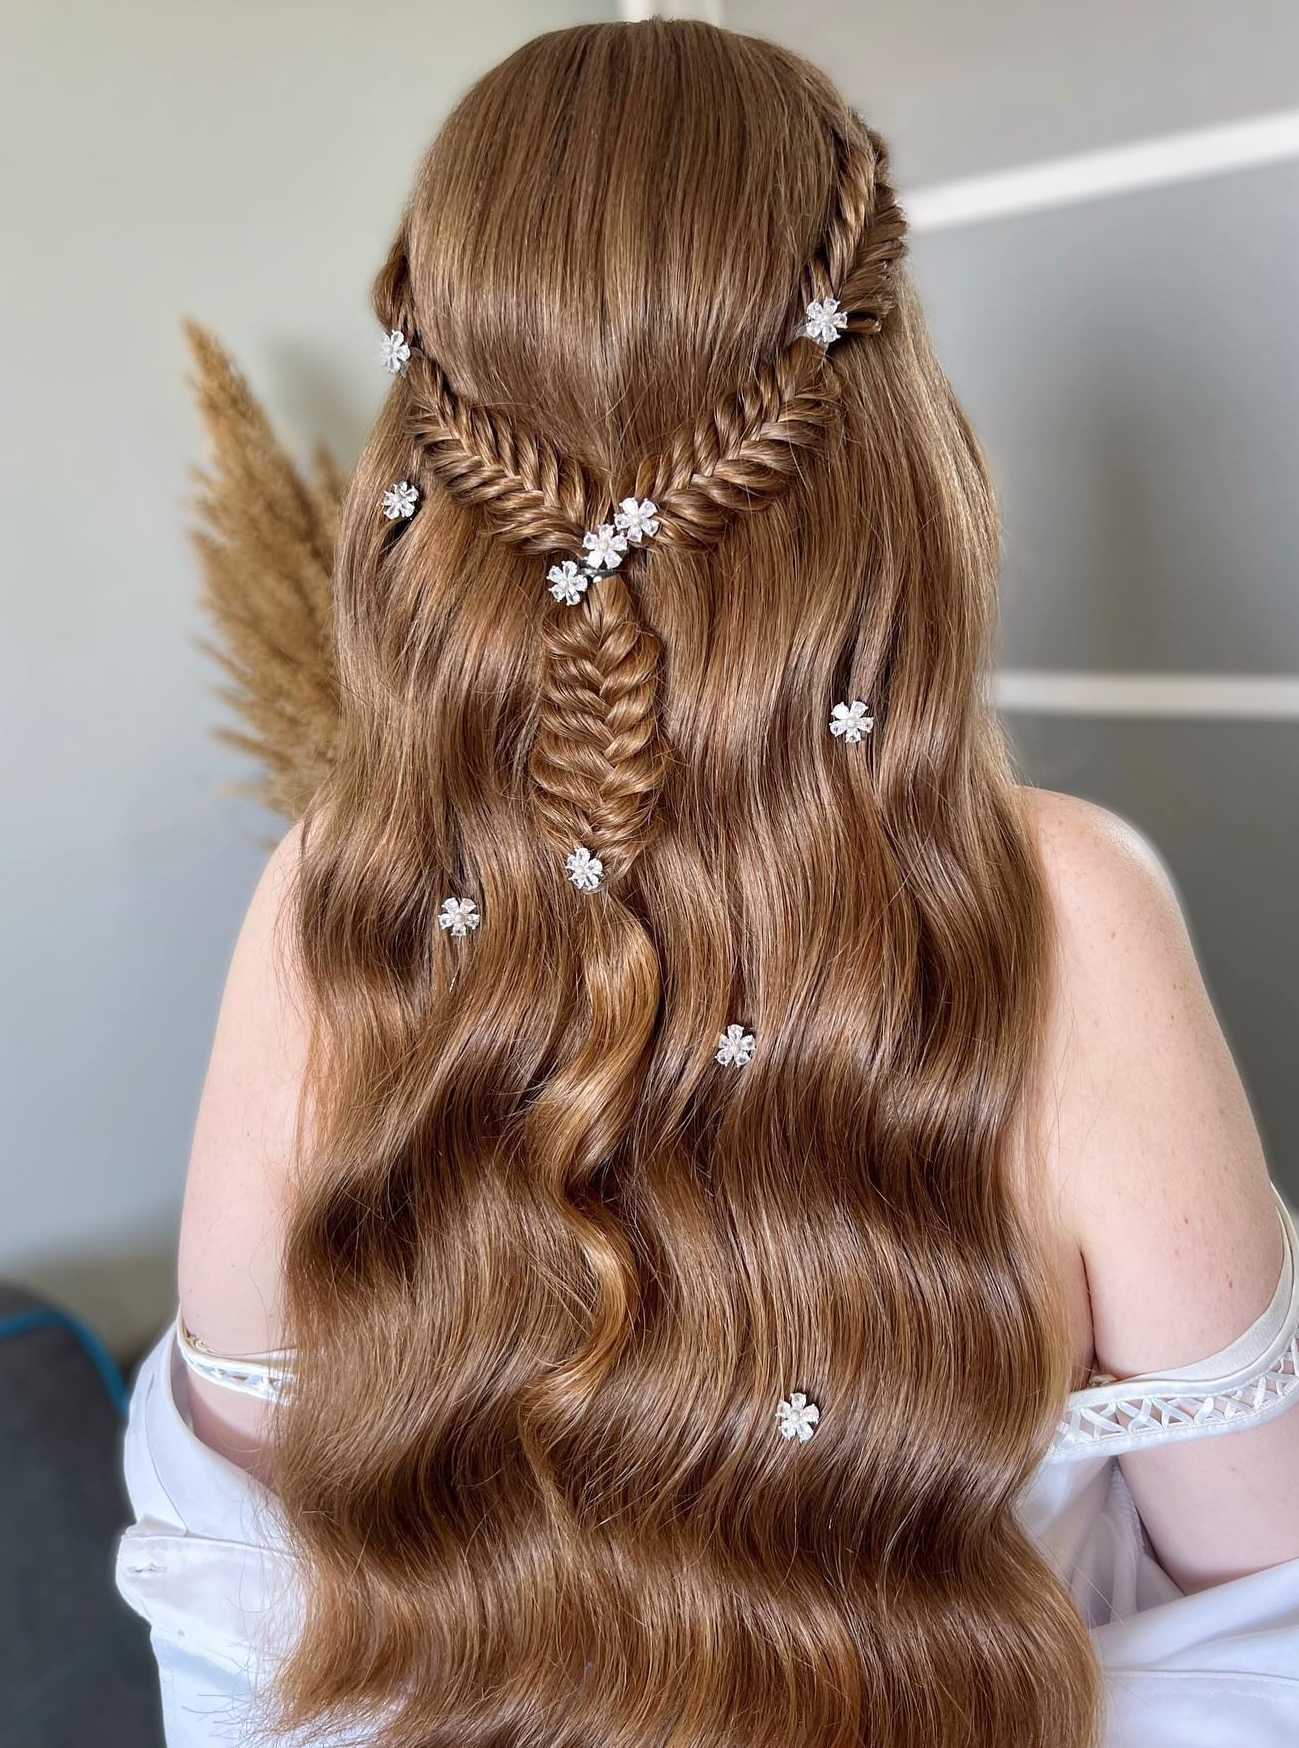 Boho Wedding Hairstyle with Braid and Hair Pins